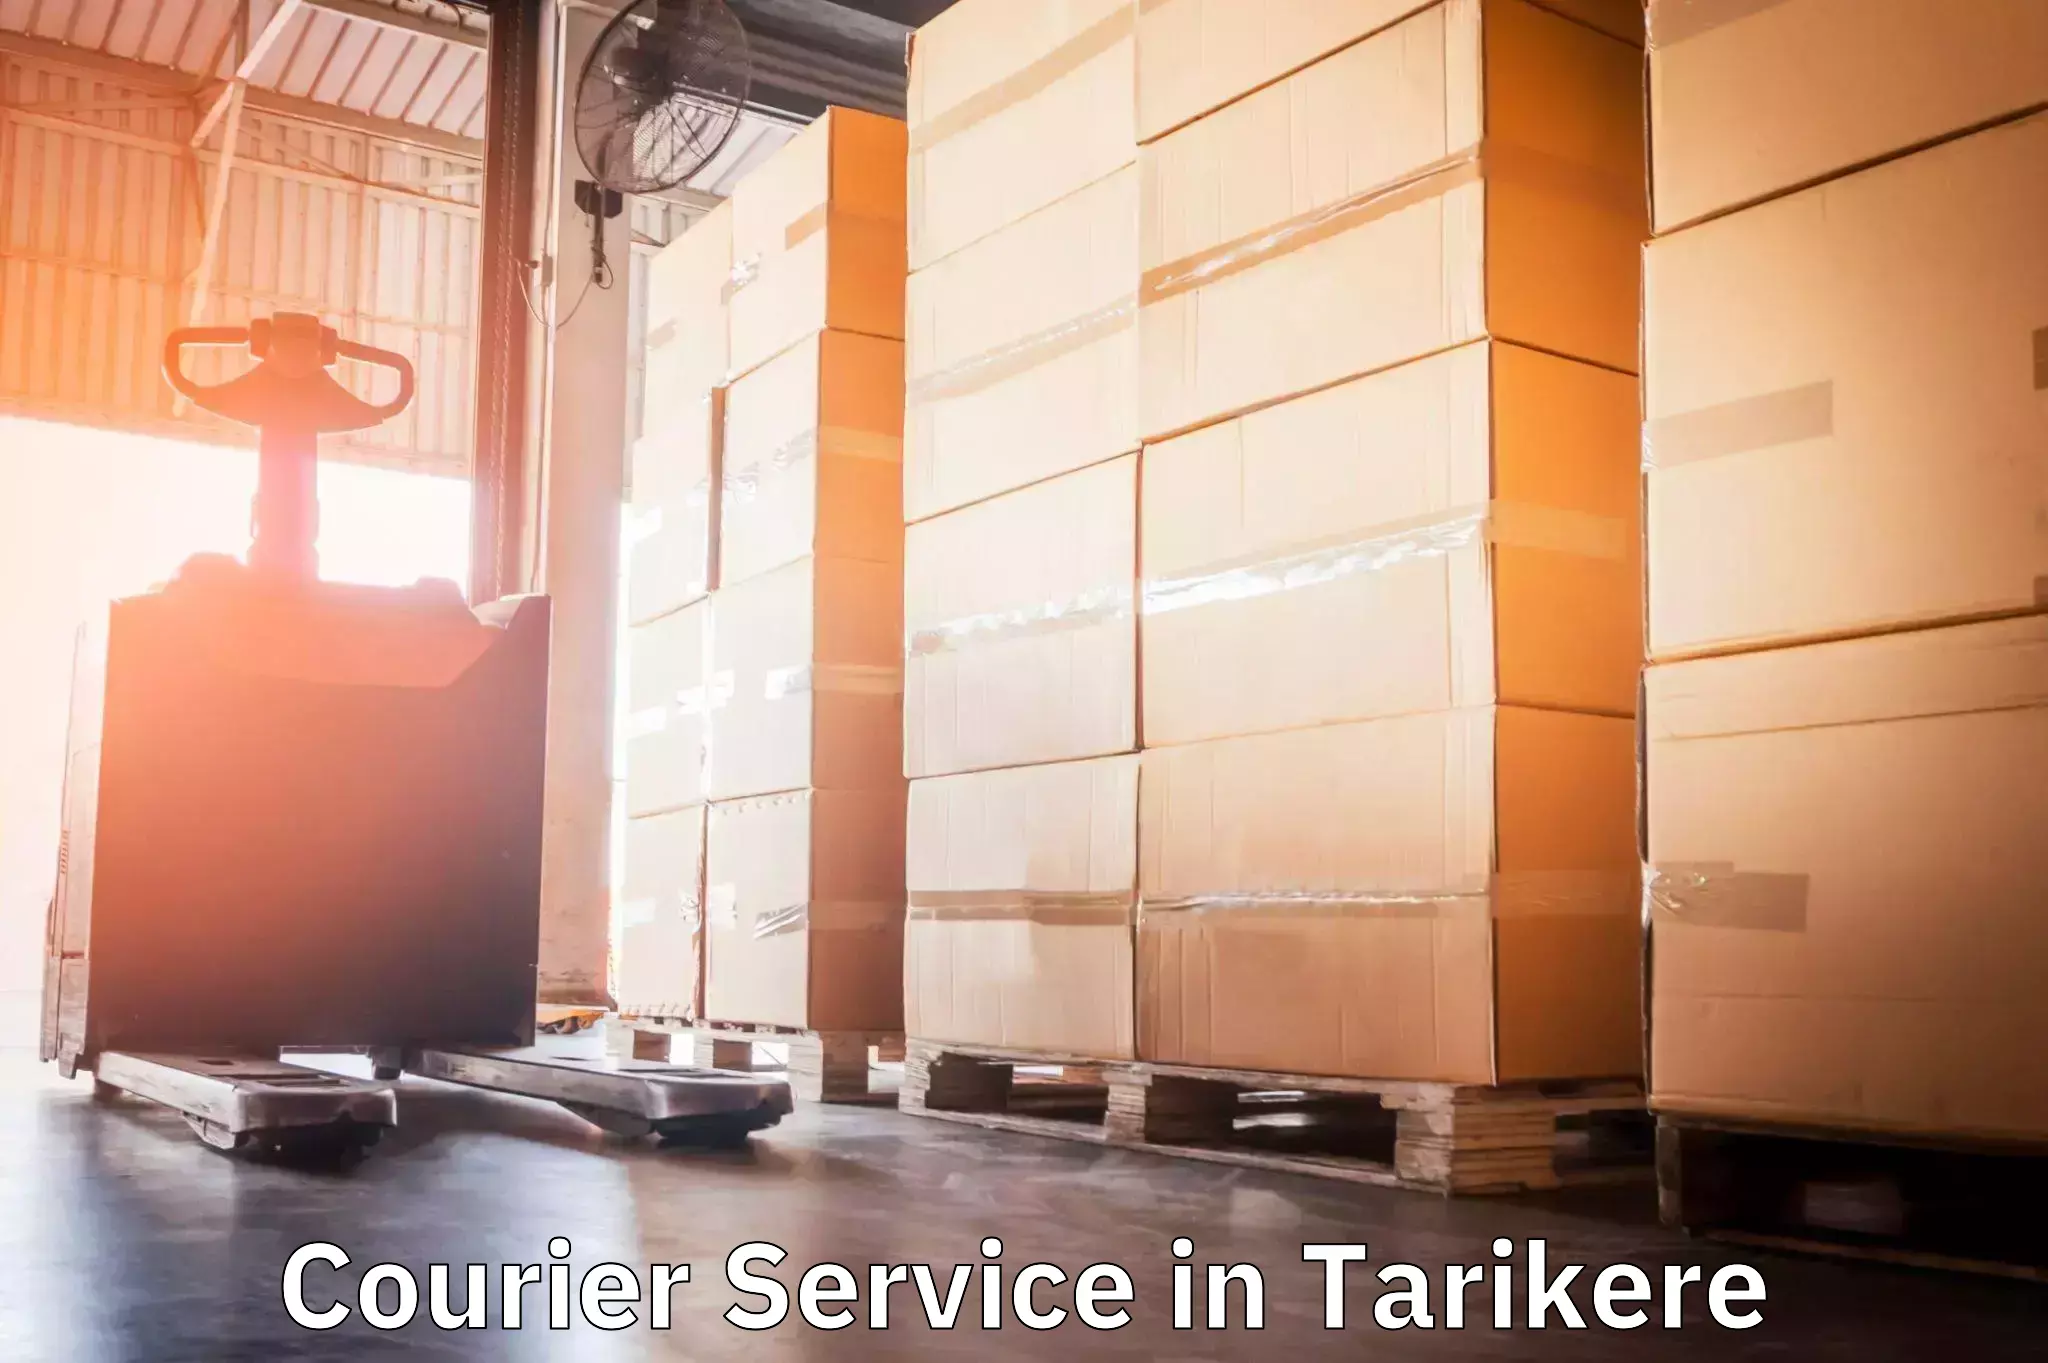 Express package services in Tarikere